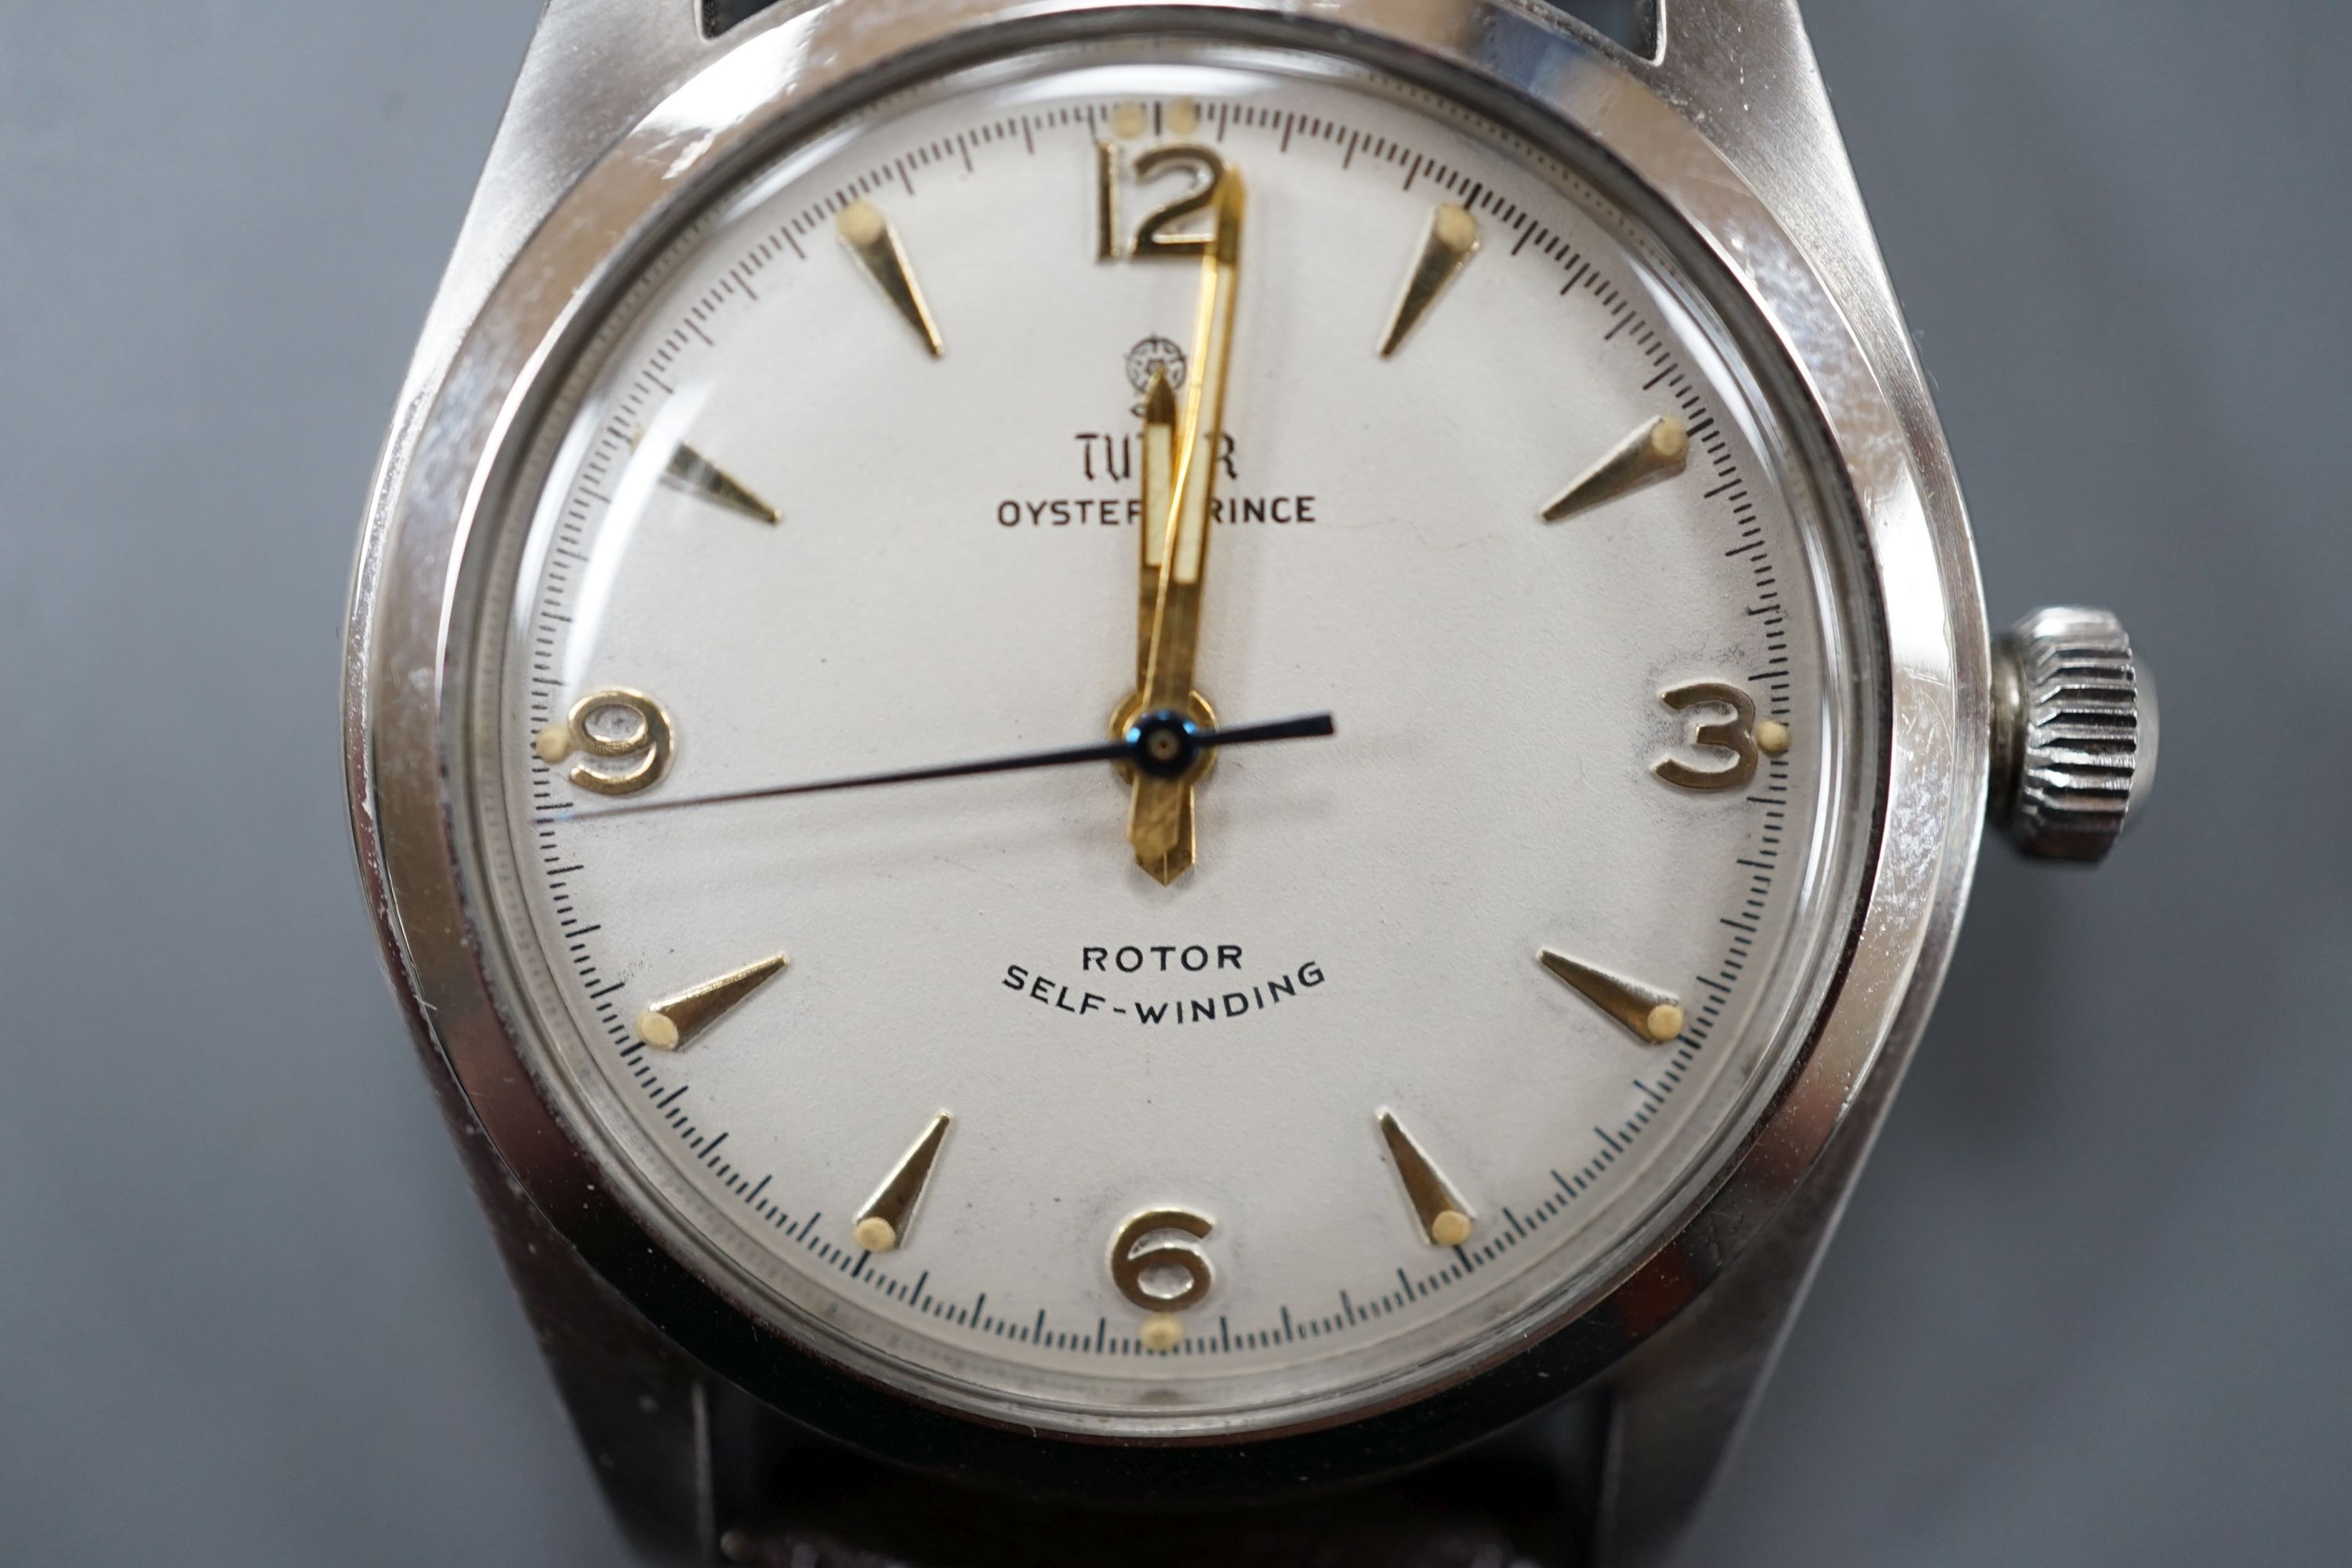 A gentleman's stainless steel Tudor Oyster Prince rotor self-winding wrist watch, case diameter 35mm, on associated leather strap.